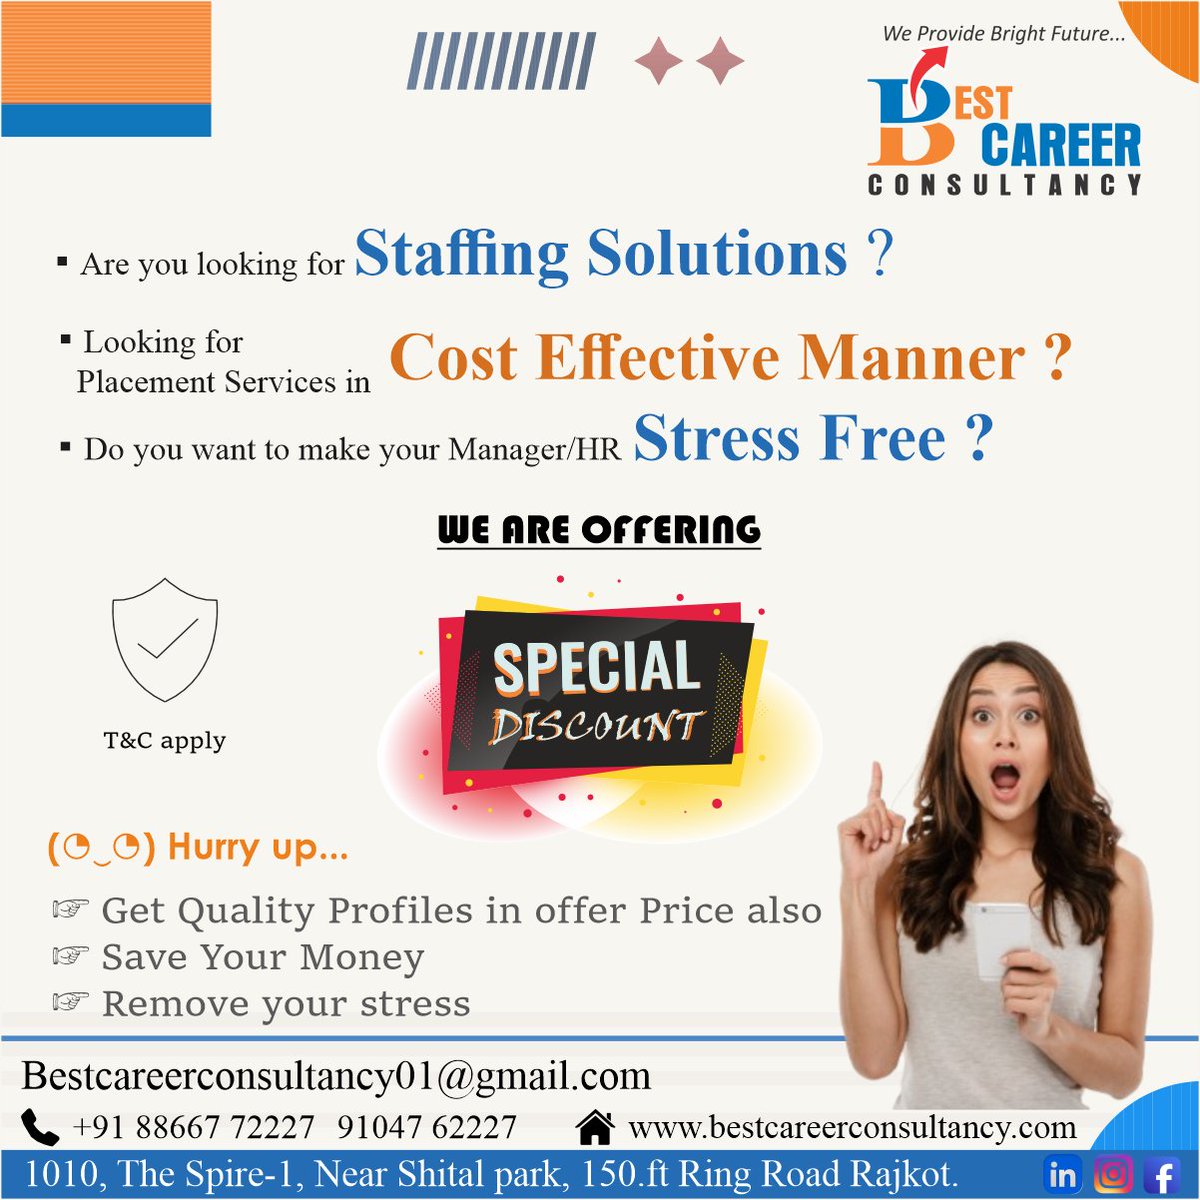 Looking for Staffing Solutions contact us Best Career Consultancy: 88667 72227.
#BestCareerConsultancy #StaffingSolutions #StaffingServices #Recruitment #Hiring #BulkHiring #Placement #PlacementServices #HRConsulting #Rajkot #Saurashtra #Gujarat #India